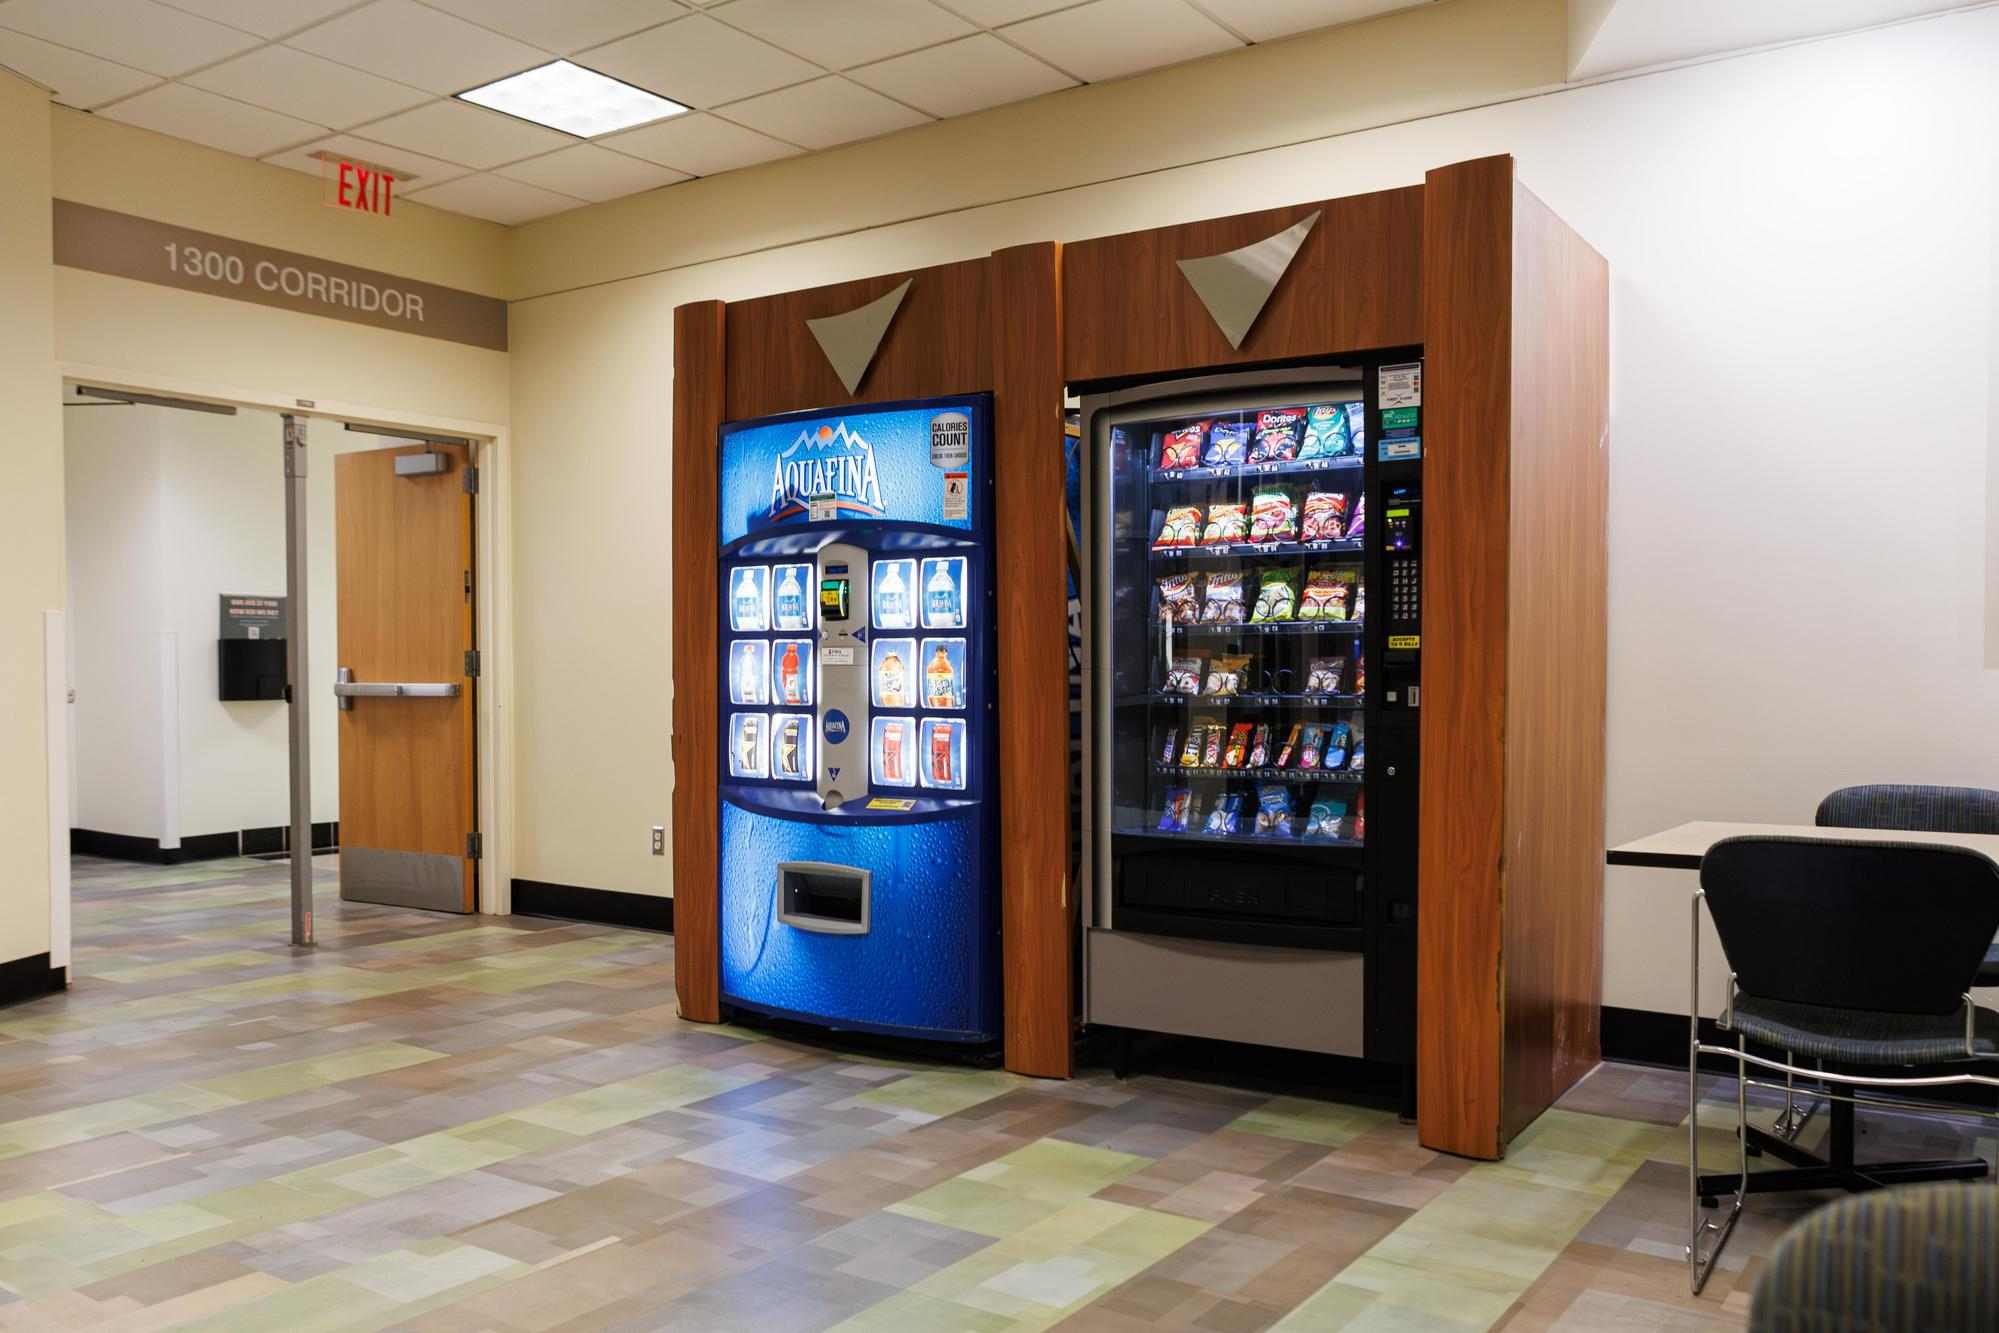 Vending machines in the bronco student center